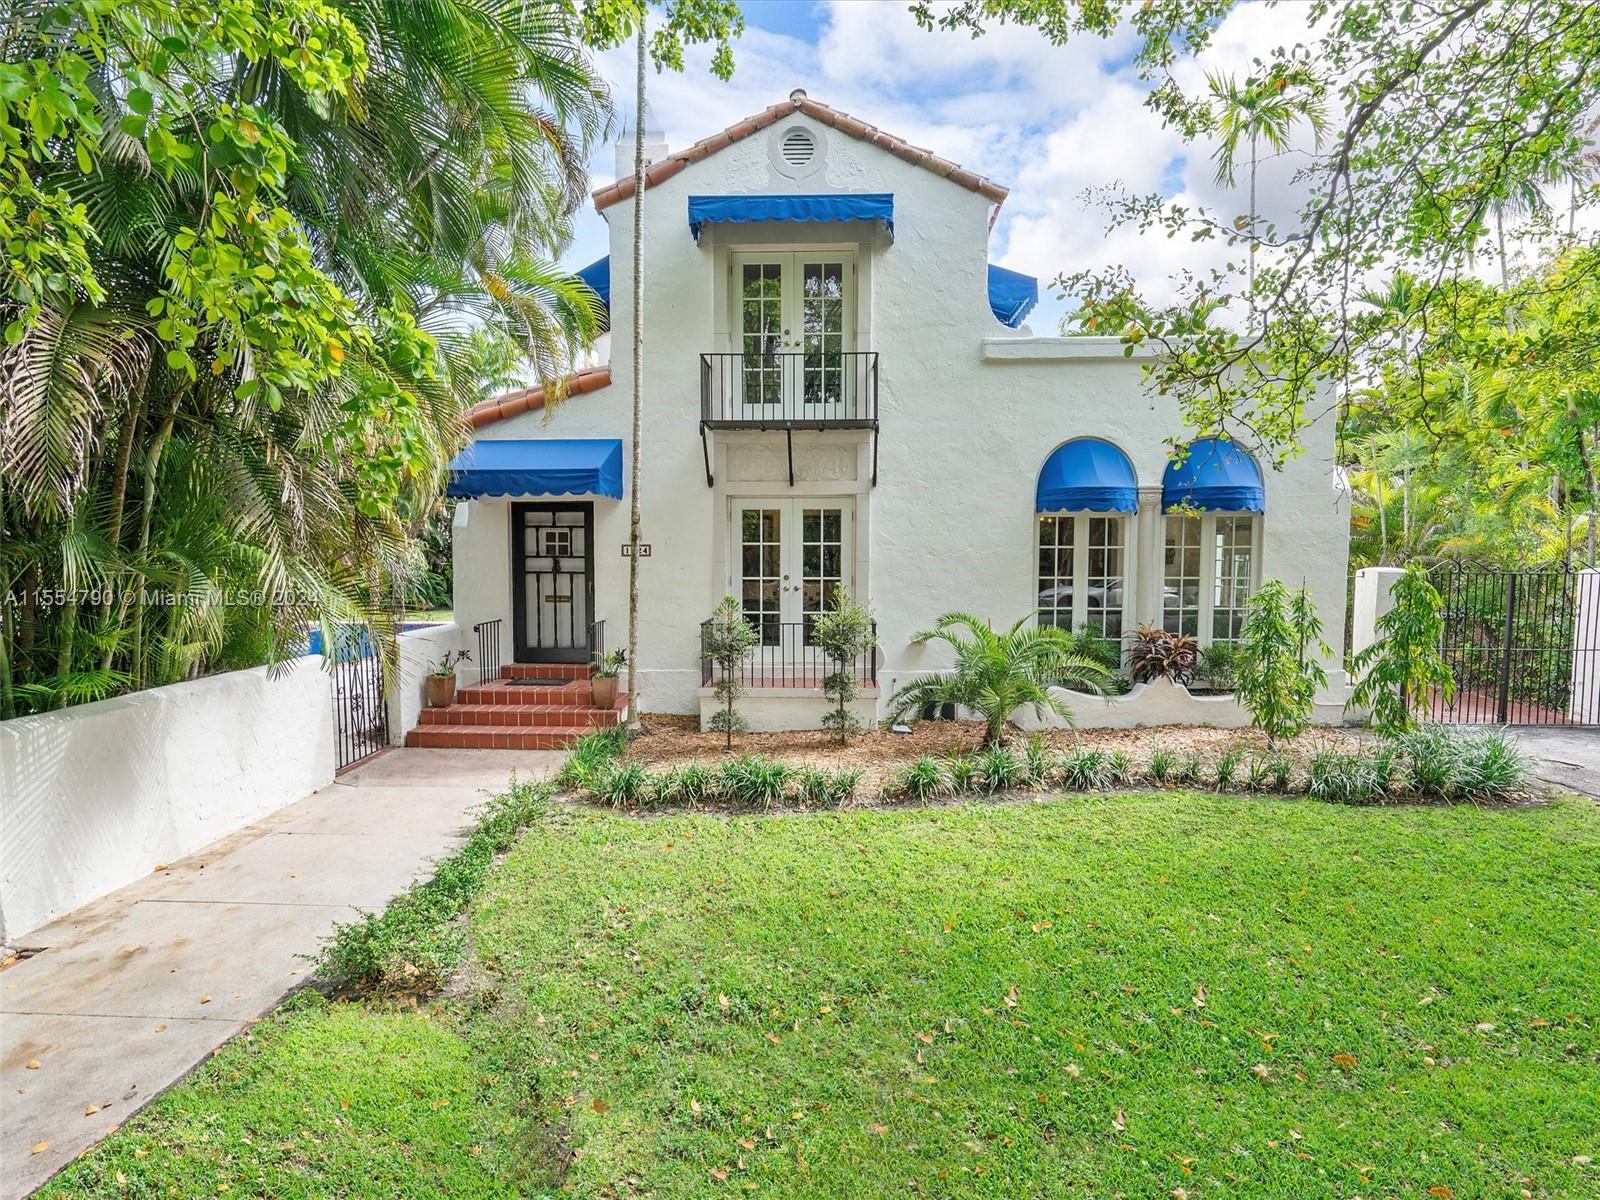 Coral Gables renovated historic landmark home on a beautiful tree-lined street in highly sought-after location. Designed in 1923 by prominent architect, Walter C. De Garmo, in the Mediterranean Revival style. A must-see two-story home on oversized lot just a short walk to Granada Golf Course, Miracle Mile, Salvadore Park, Venetian Pool, and The Biltmore. Lot includes a fully-equipped Casita, detached Garage, and large resort-like mosaic tiled pool. Property has a total of 4 Bdrms with 4 Baths, tall ceilings, original architectural embellishments, and abundant natural daylight. Easy access to MIA Airport, U of Miami, and downtown Coral Gables. A perfect home for indoor and outdoor entertaining with lush landscaping affording privacy. Easy to schedule a showing of this magnificent property.